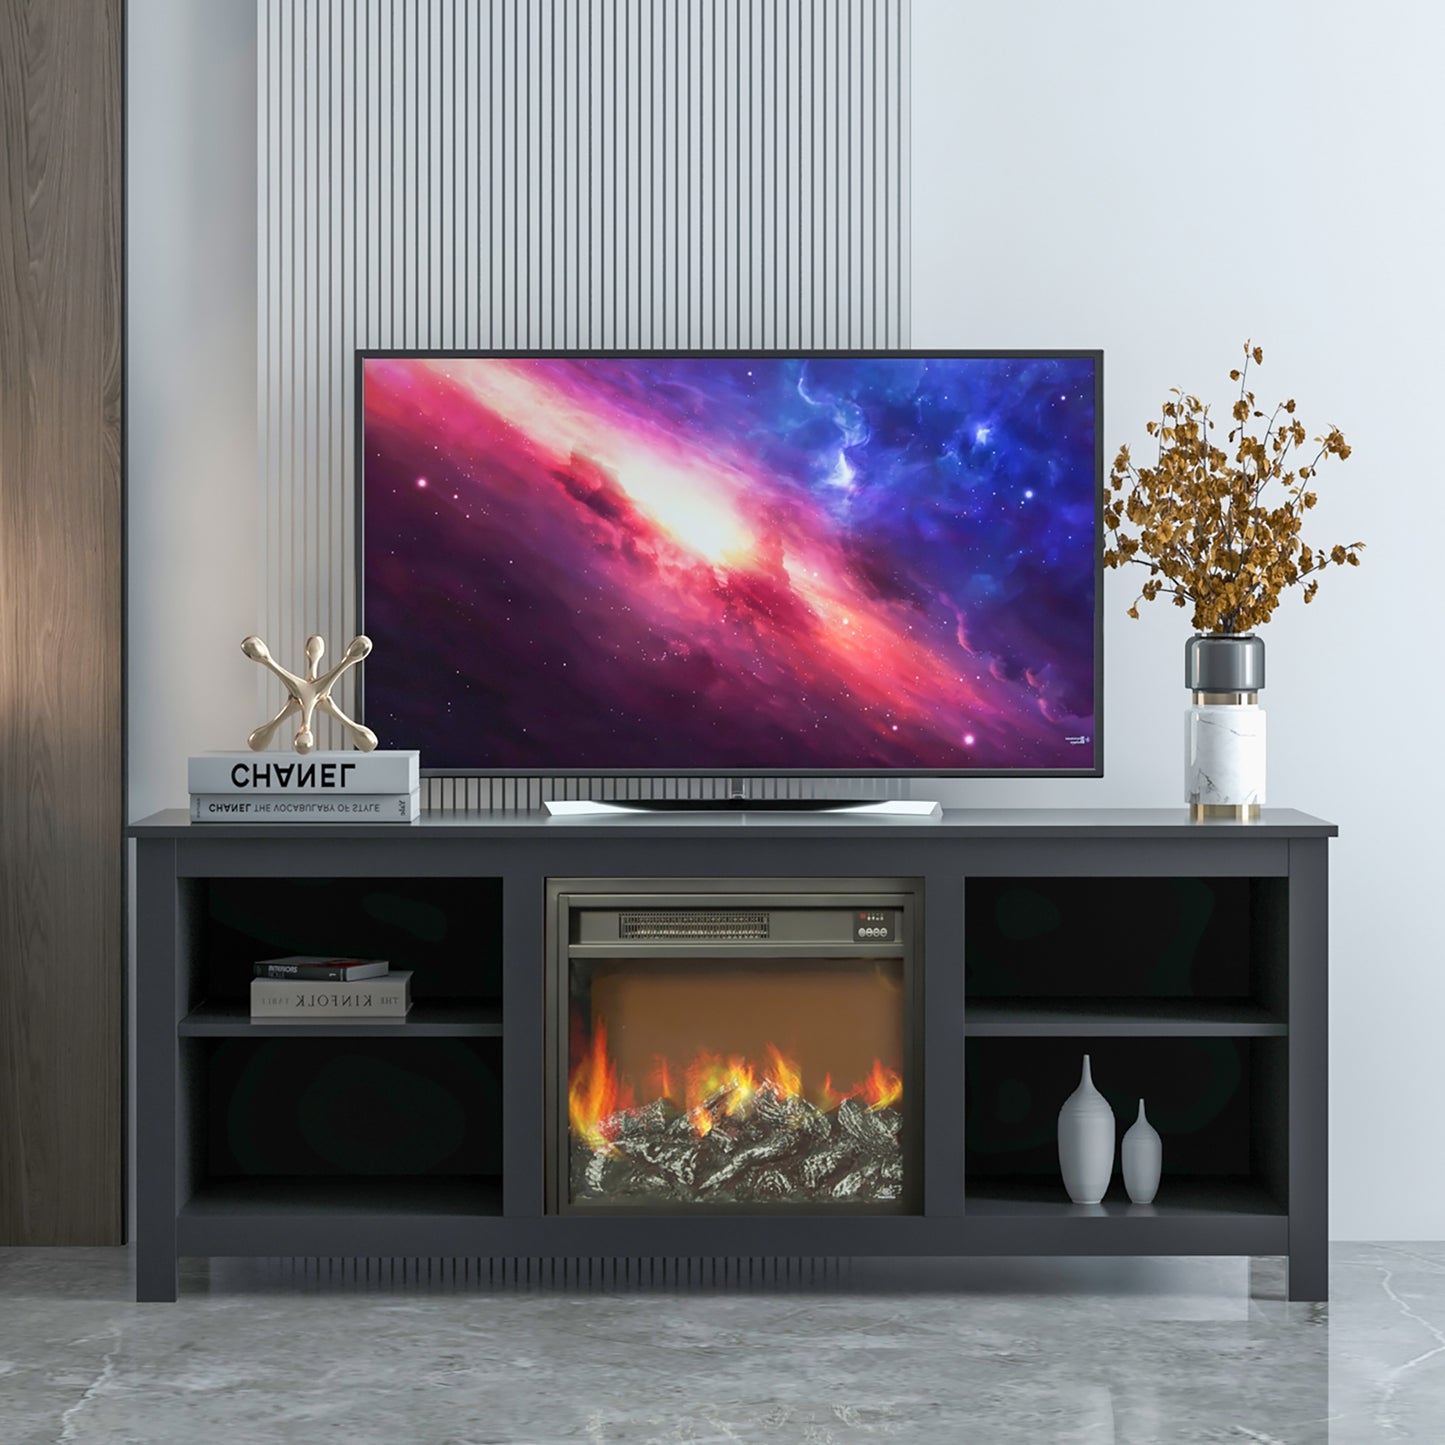 Fireplace TV Stand for TV up to 65 inches, Wood Electric Fireplace TV Console Table Stand with Storage Open Shelves, Home Living Room Entertainment Center, White, 58"L x 16"W x 24"H